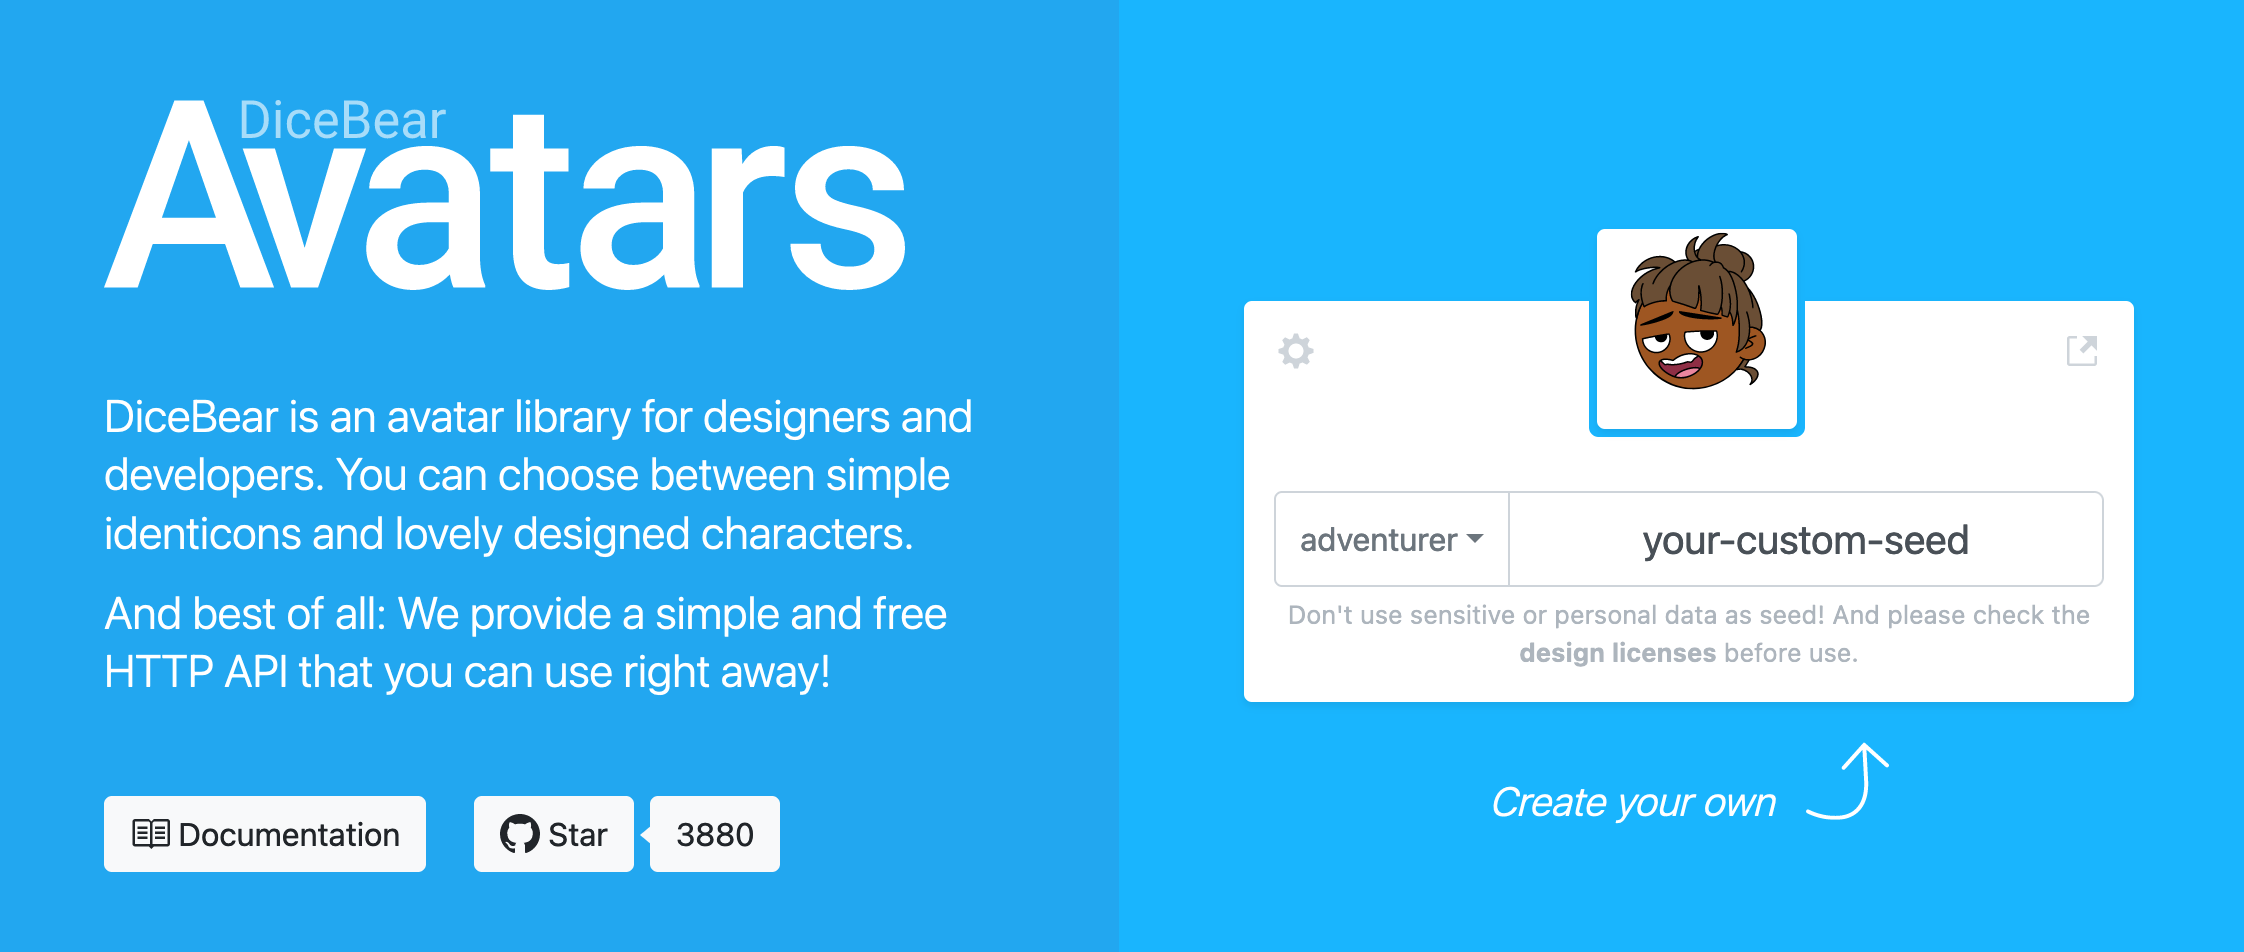 DiceBear avatars - DiceBear is an avatar library for designers and developers. You can choose between simple identicons and lovely designed characters.  And best of all: We provide a simple and free HTTP API that you can use right away!